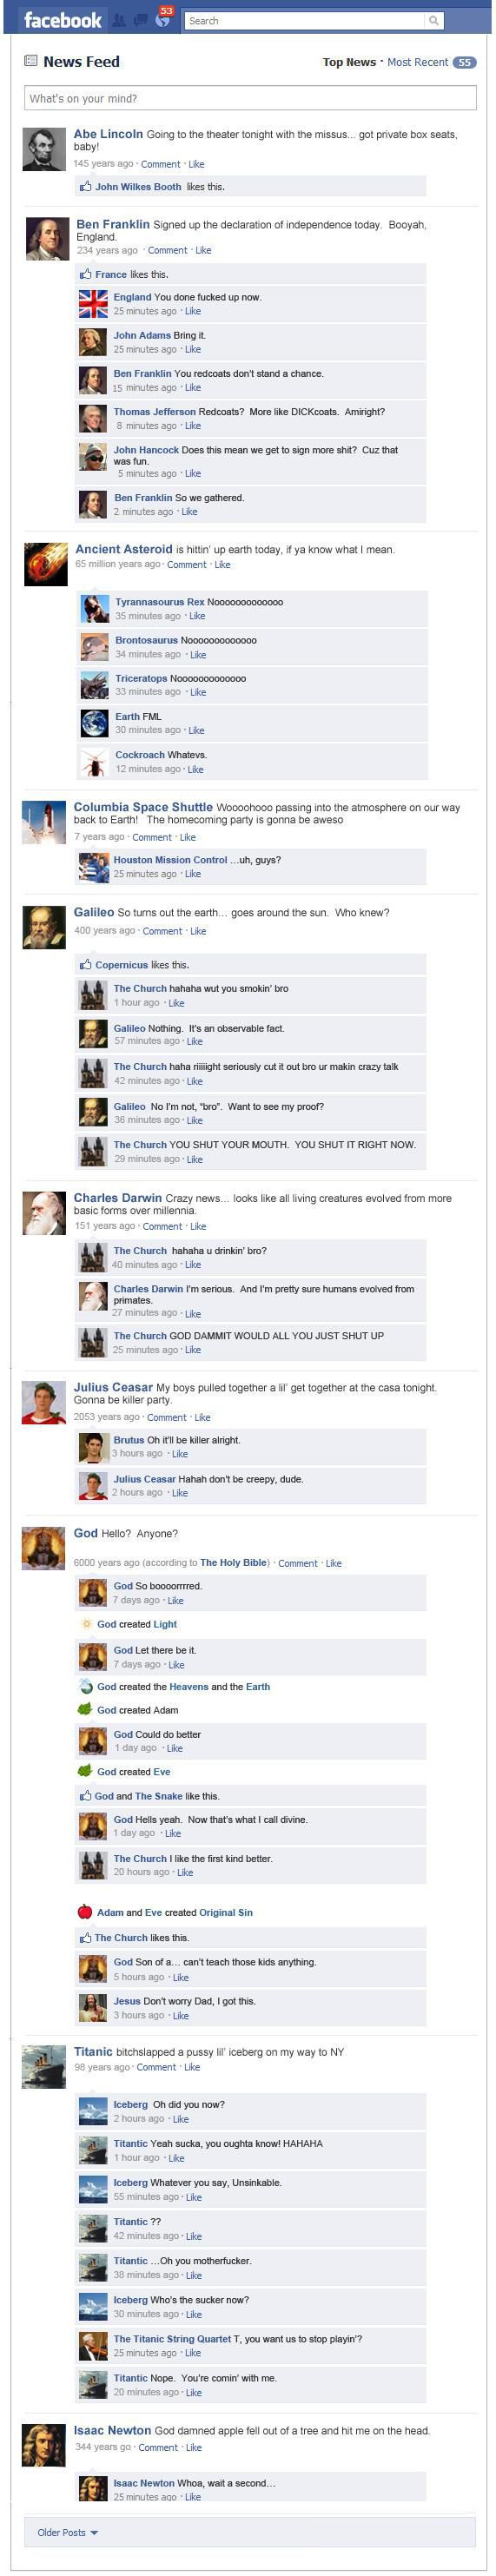 Historical Events on Facebook (1 pic)